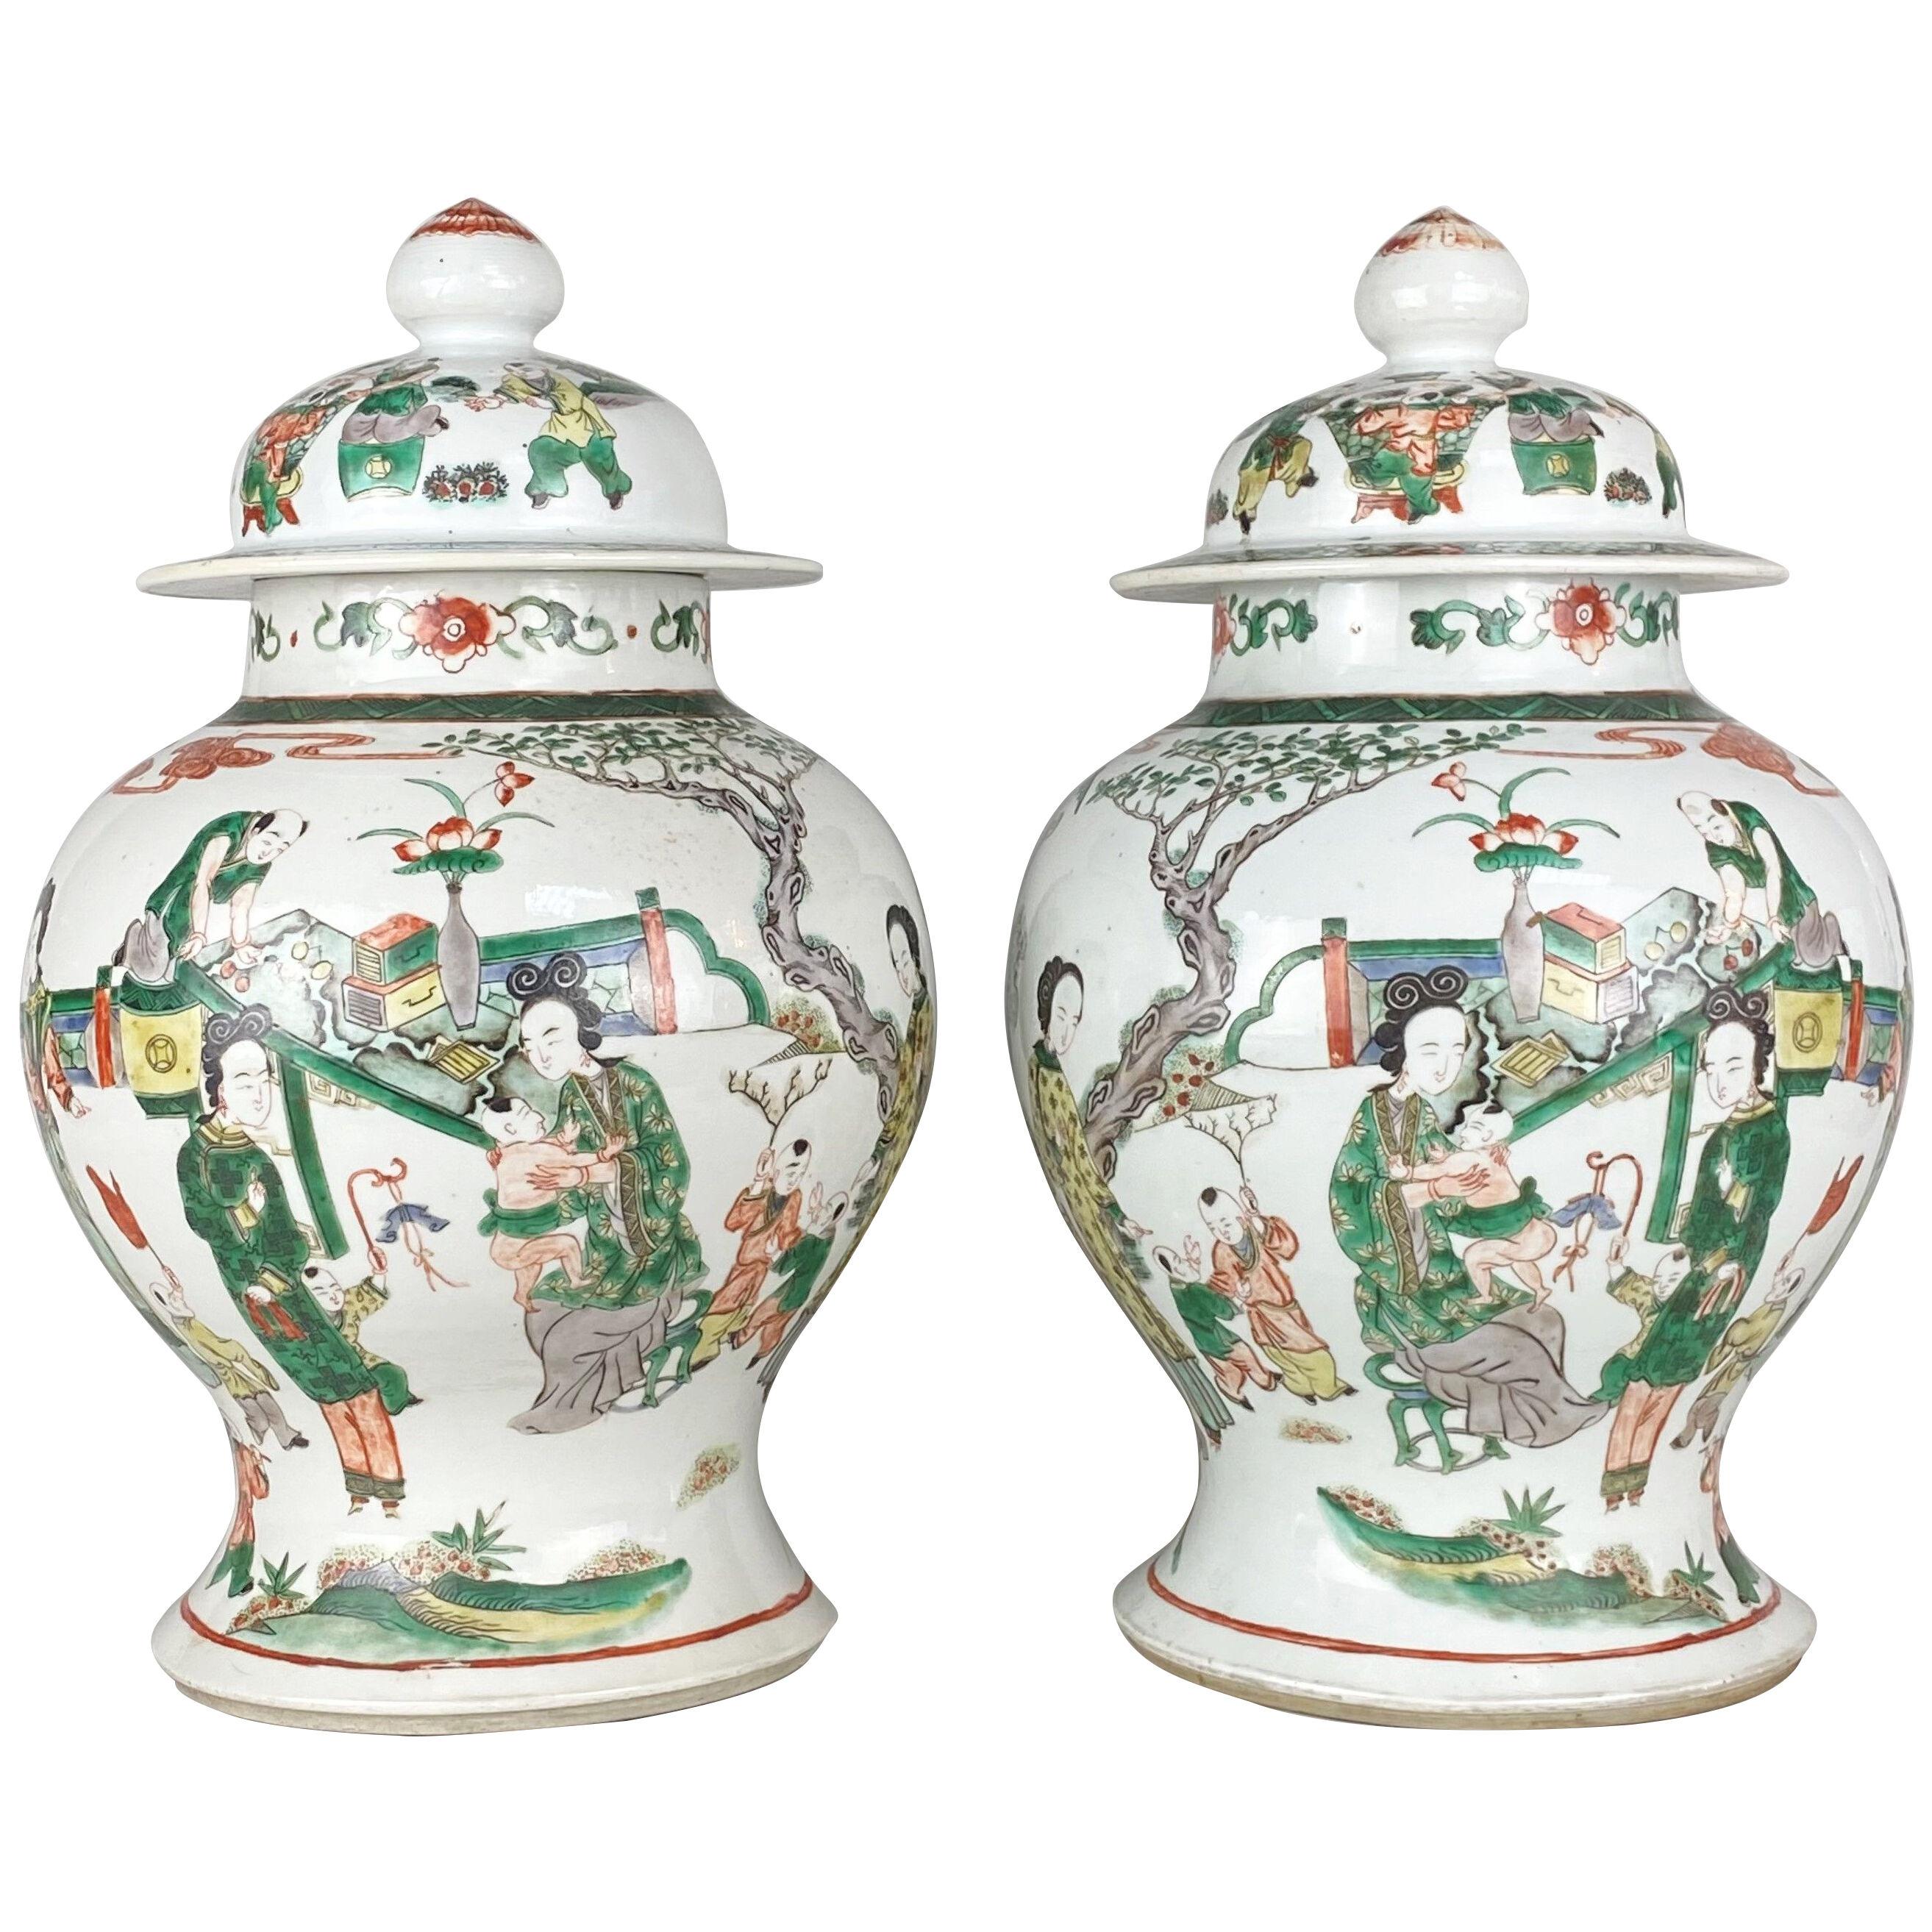 A charming pair of 19th Century Chinese famille verte jars and covers